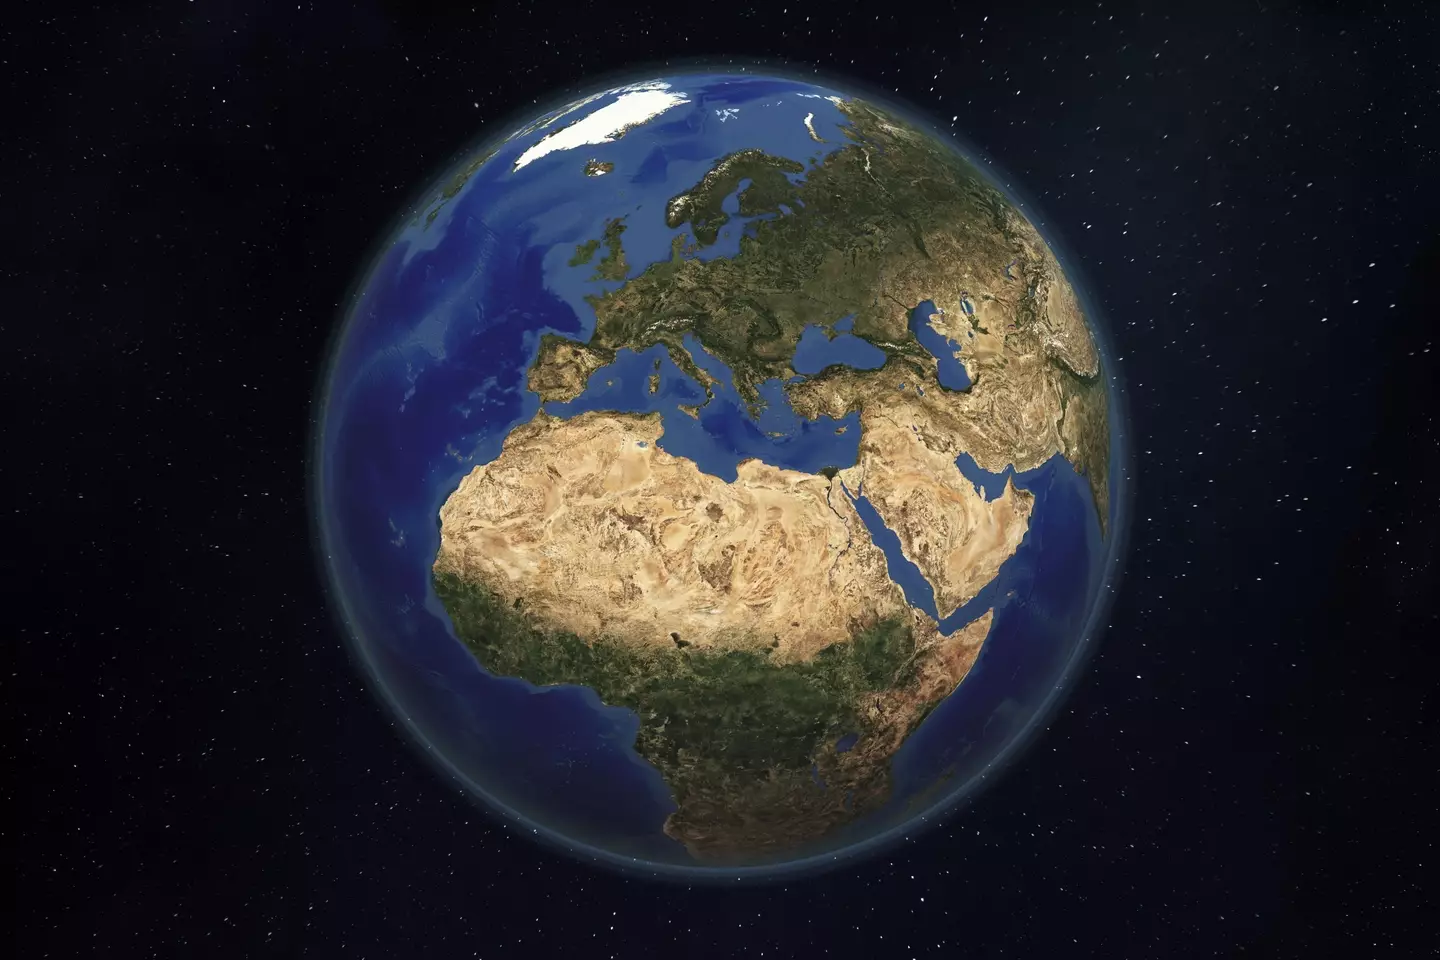 Have we finally found Earth 2.0? (Maps4media via Getty Images)